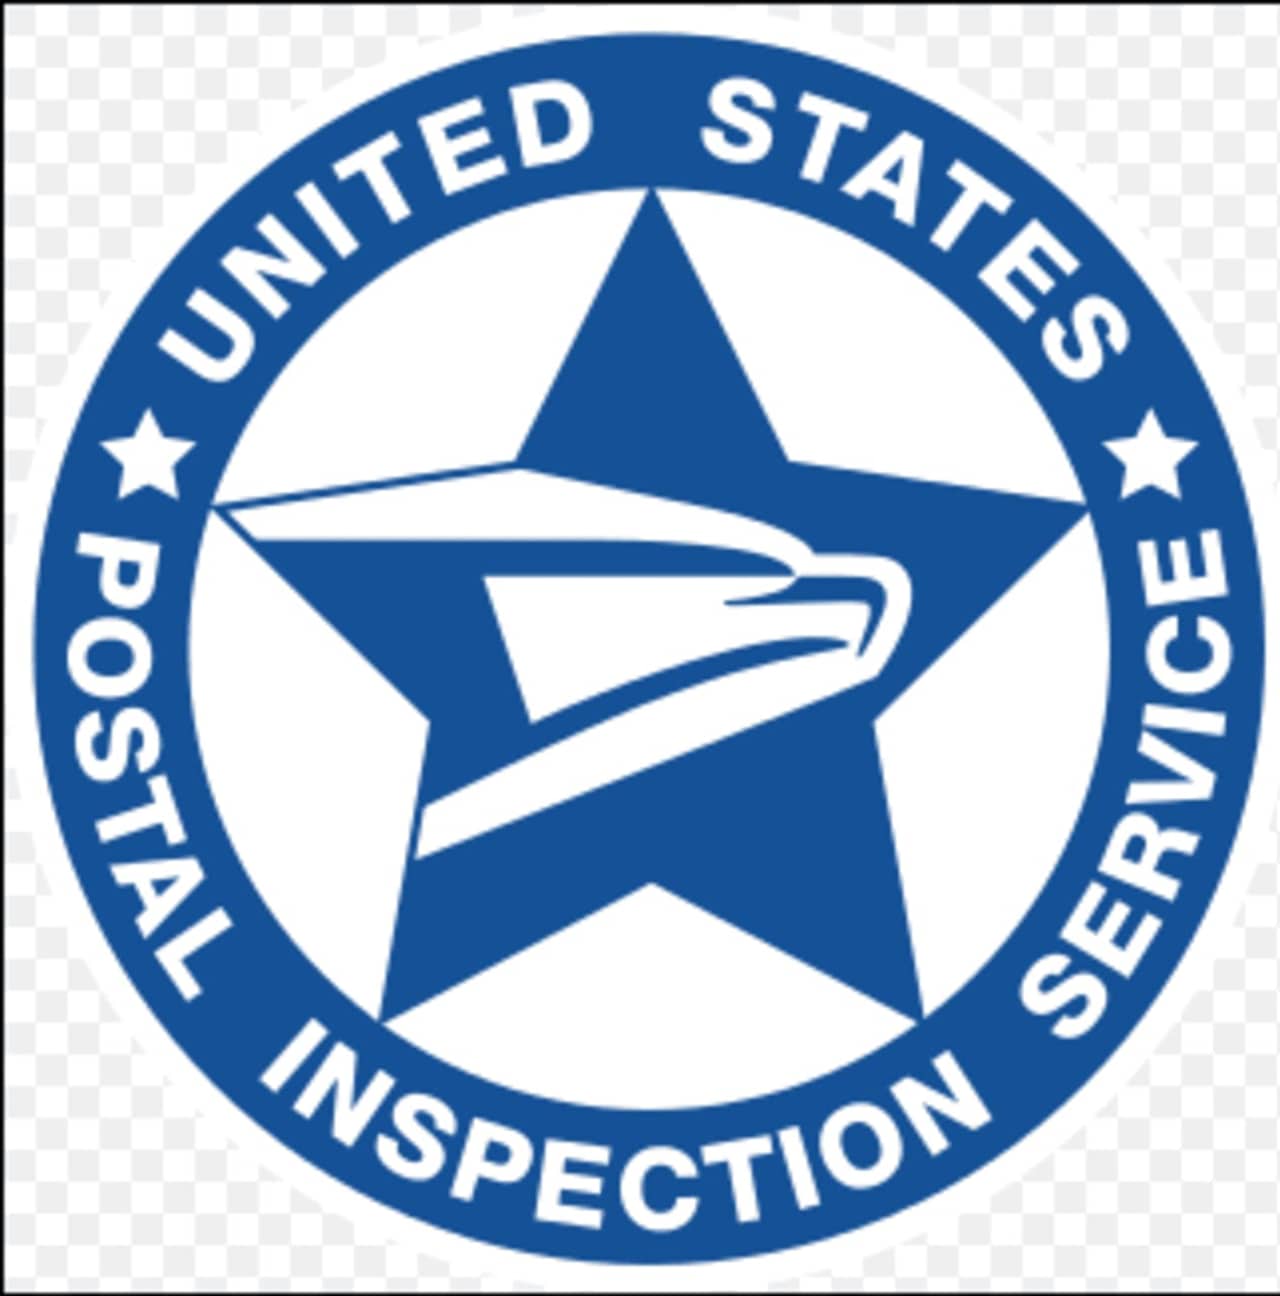 The U.S. Postal Inspection Service and Preet Bharara, the U.S. attorney for the Southern District of New York, announced the filing of a criminal complaint against men from Tappan and Cresskill.